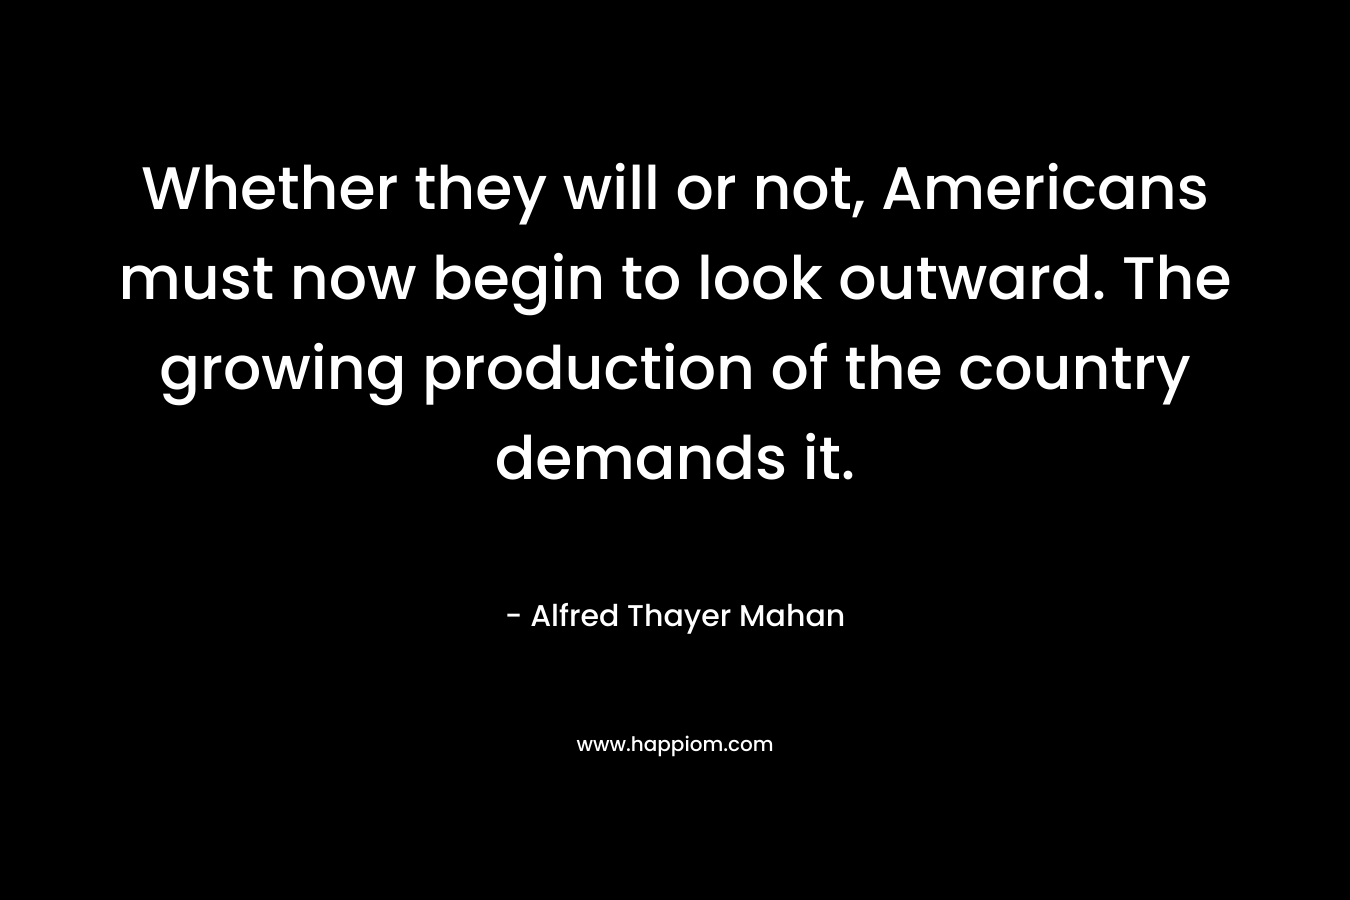 Whether they will or not, Americans must now begin to look outward. The growing production of the country demands it.